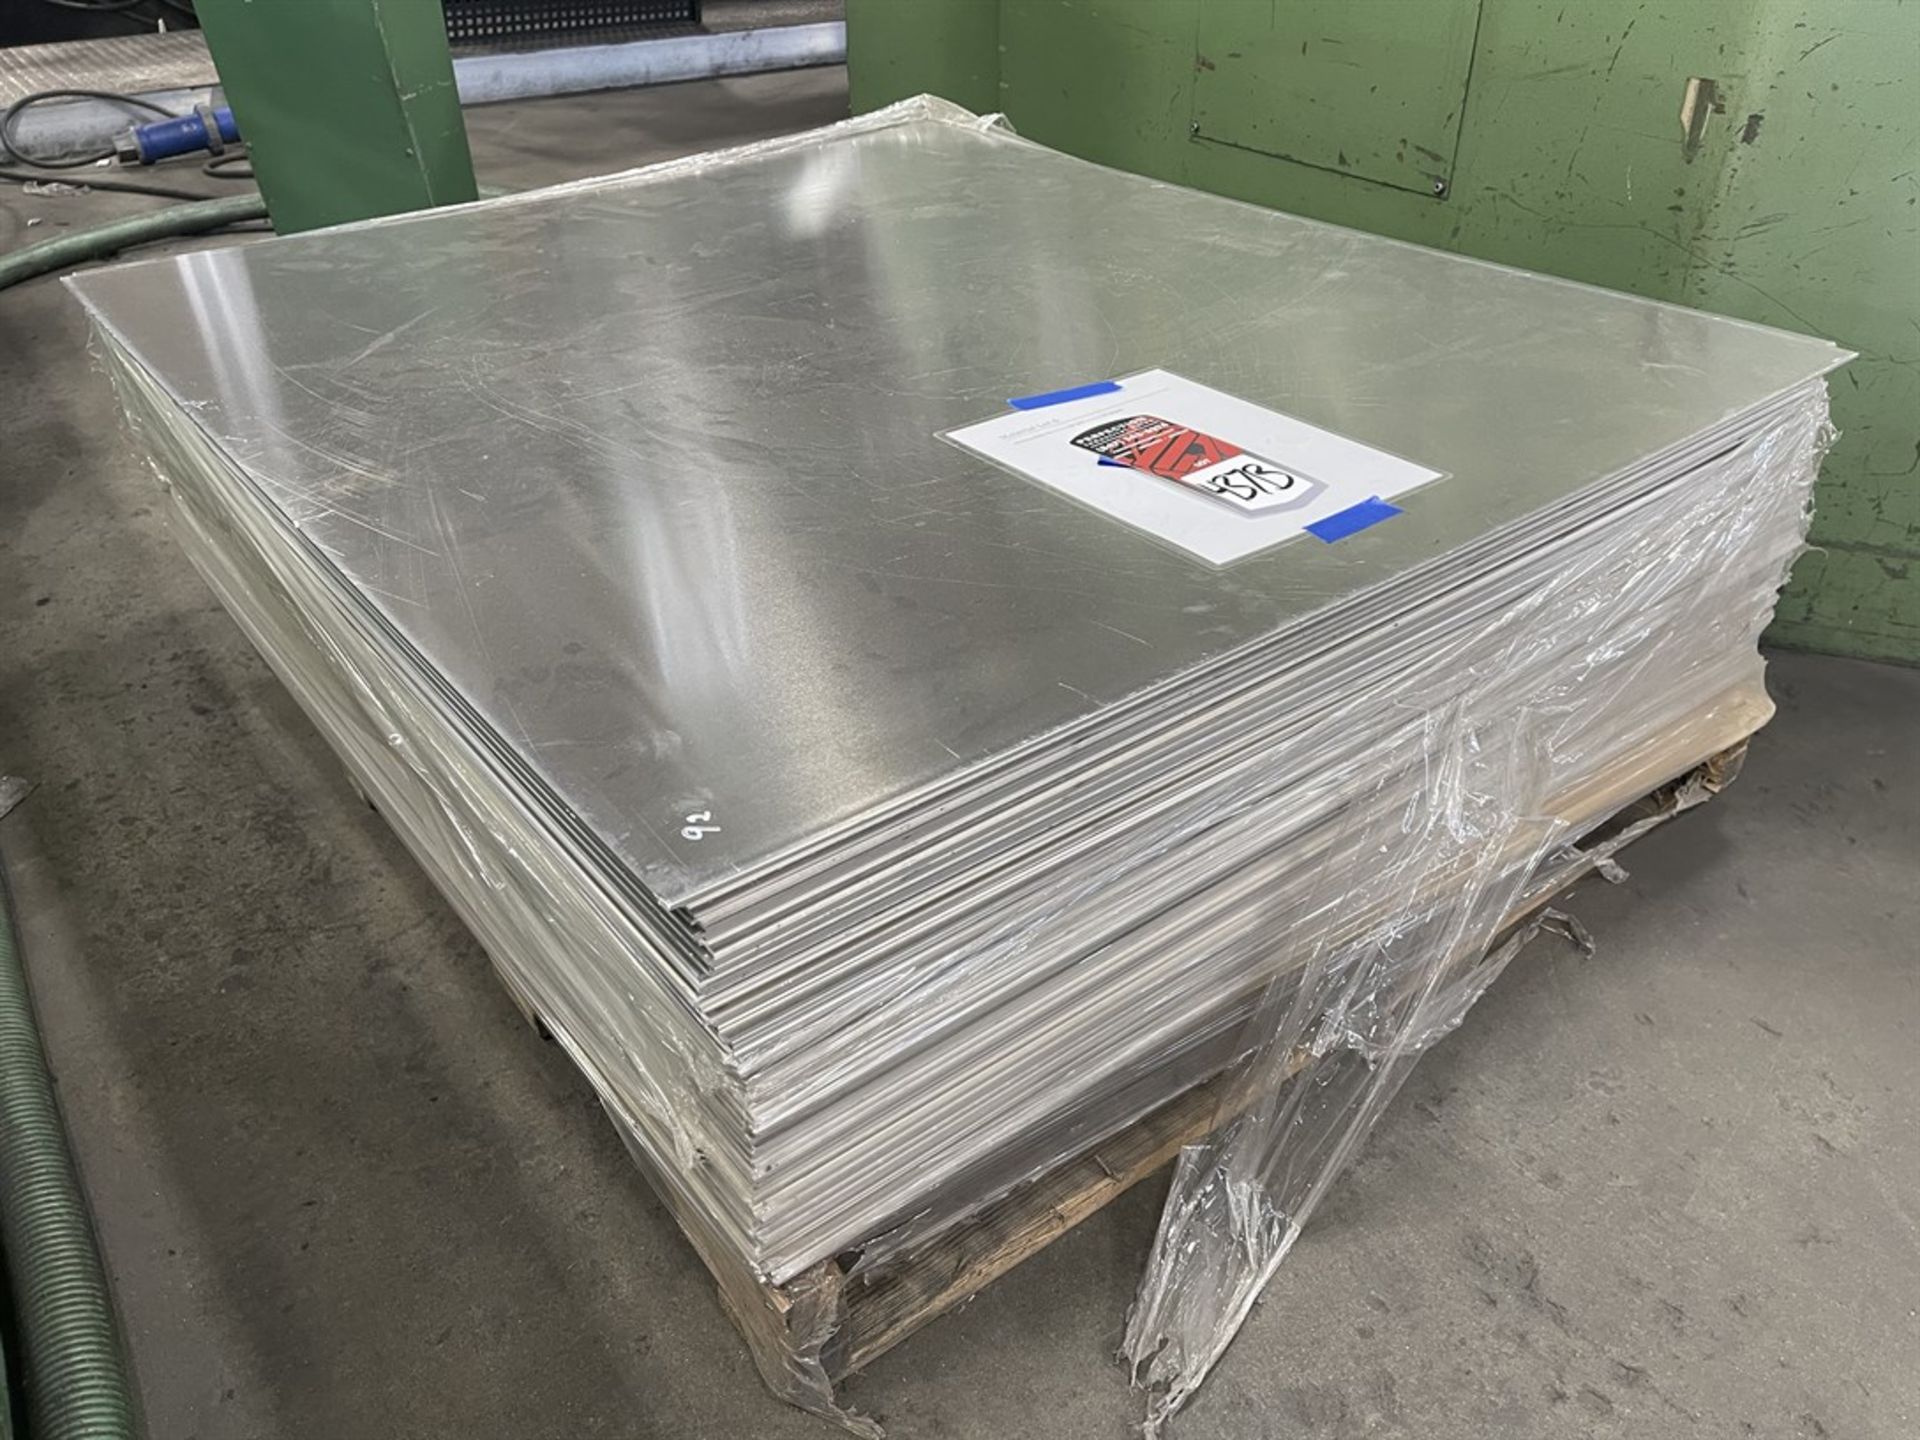 Lot of .125 Aluminum 6061-T6 48" x 41" Sheets - Image 2 of 3